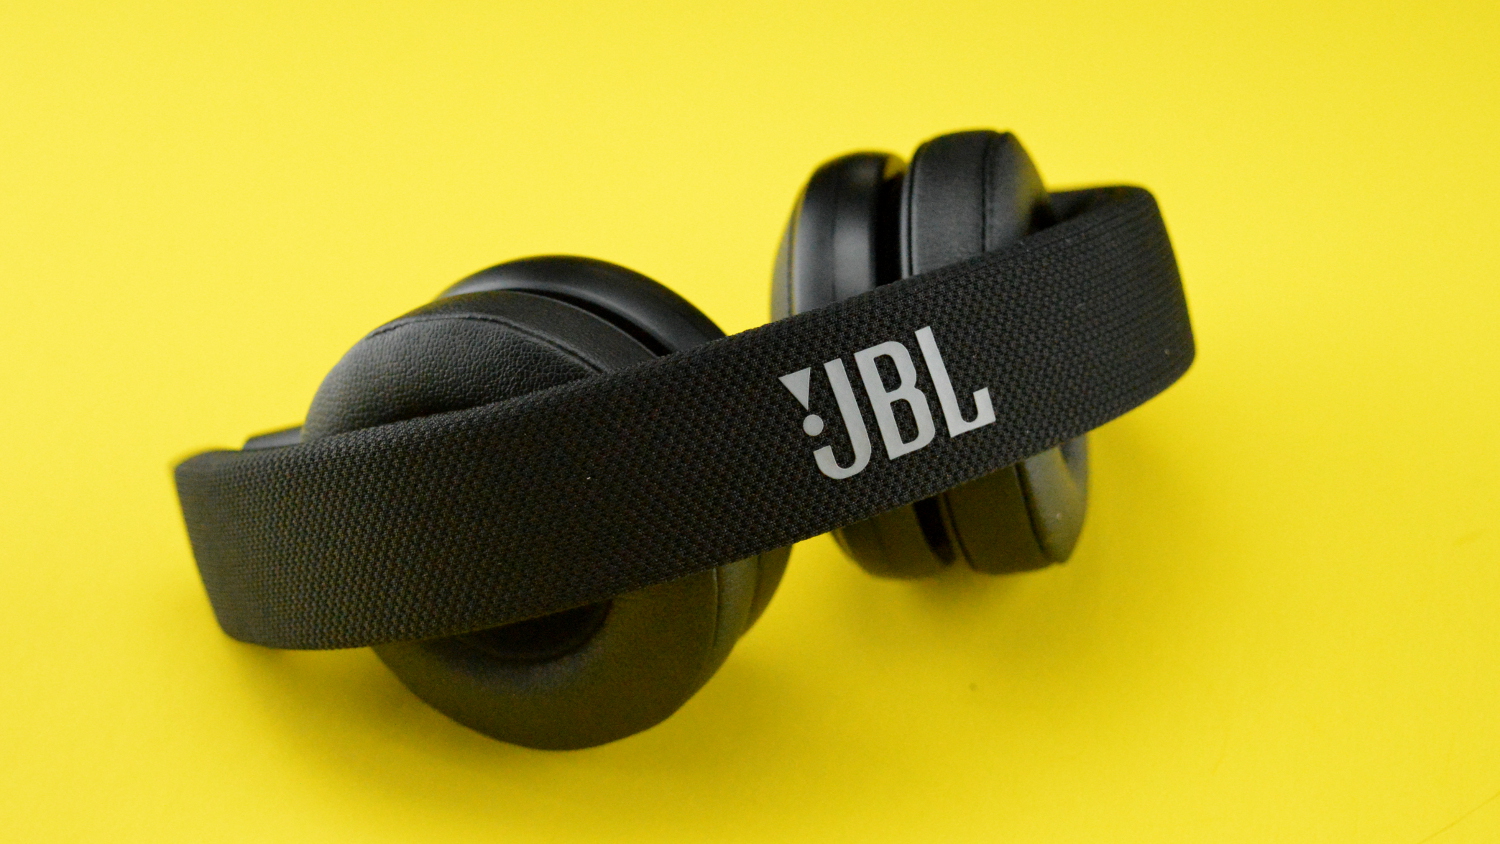 Forbindelse Chaiselong medley JBL E35 On-Ear Wired Headphones Review - Headphone Review